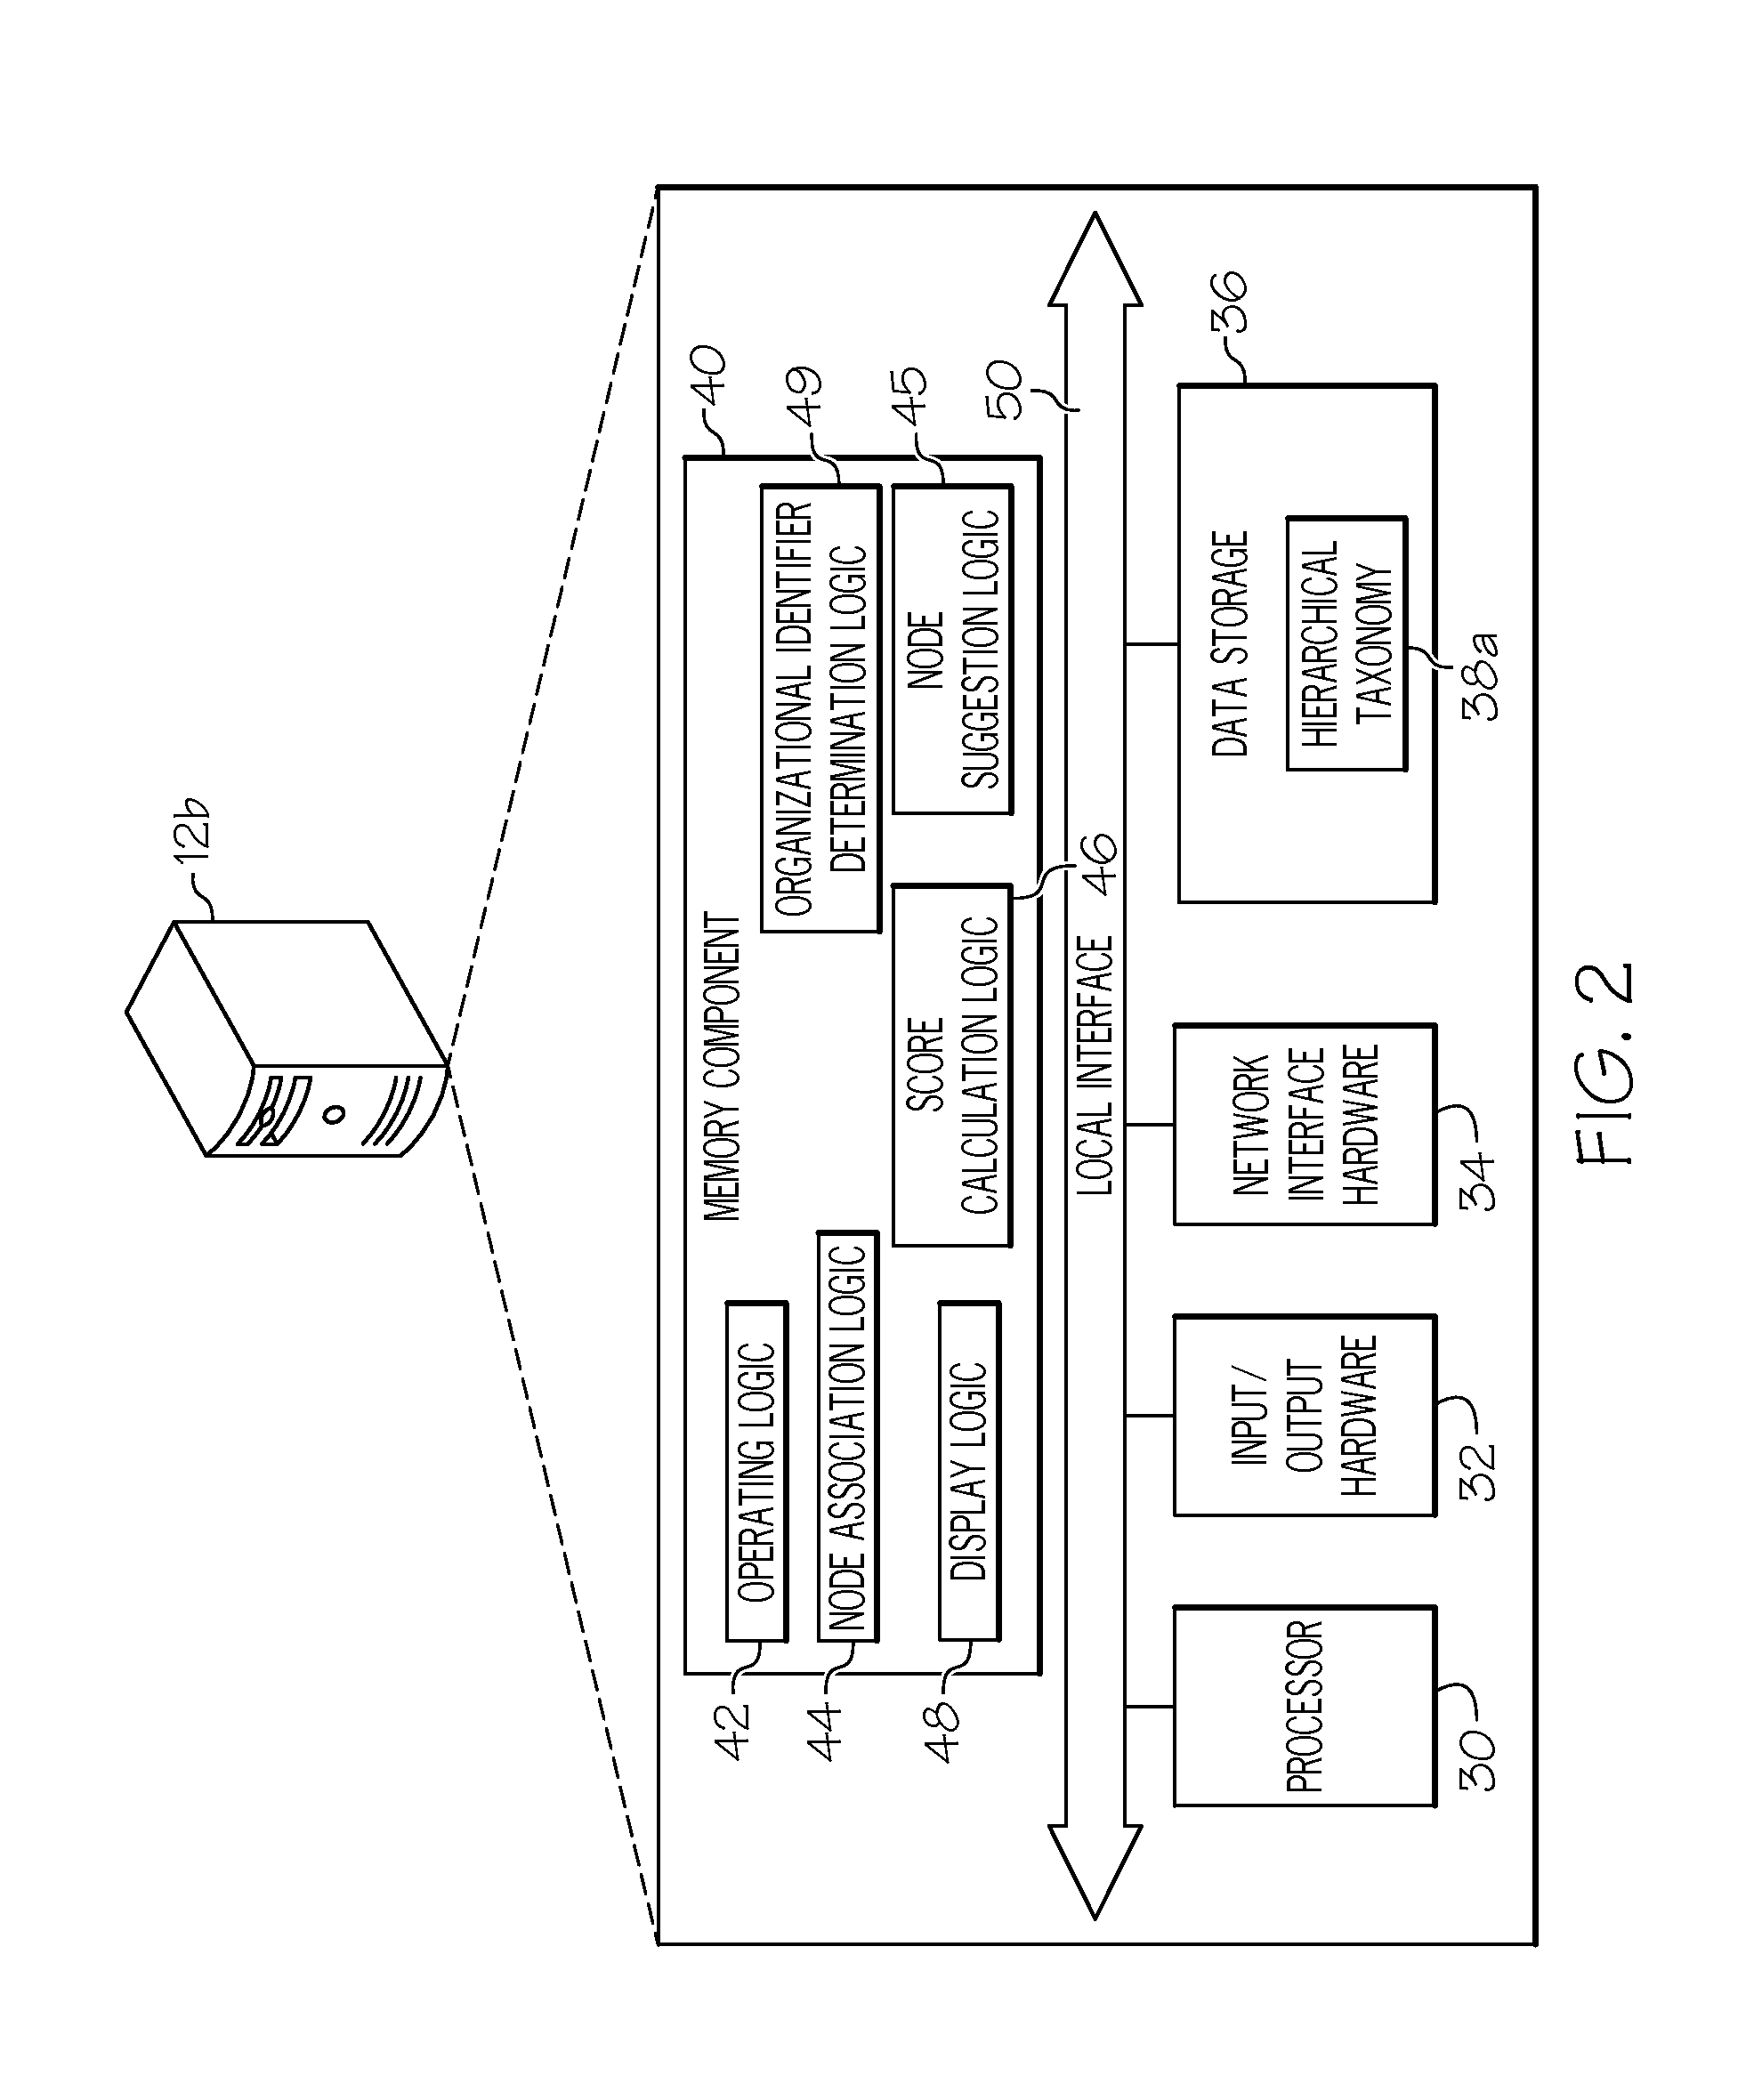 Systems and methods for providing for display hierarchical views of content organization nodes associated with captured content and for determining organizational identifiers for captured content